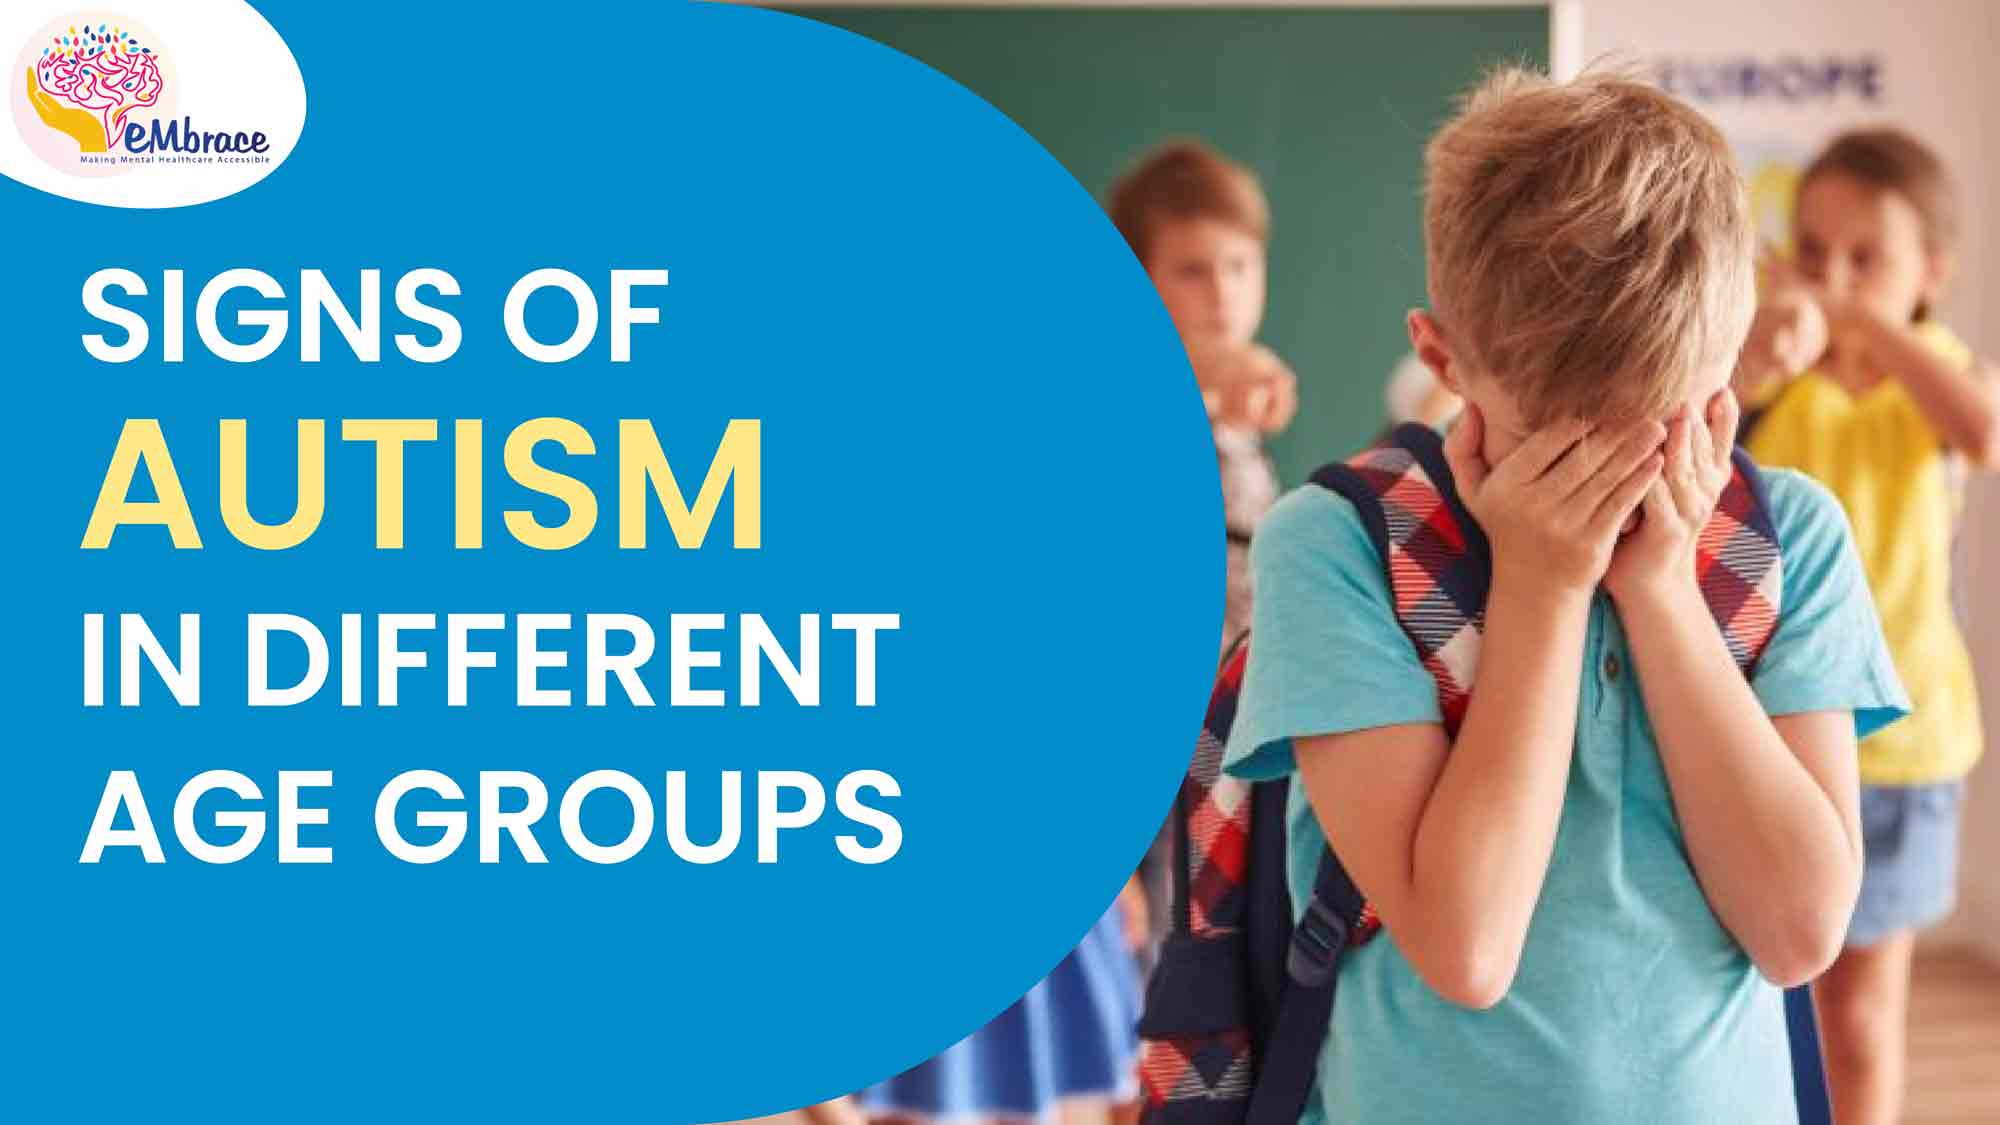 Signs of autism in different age groups